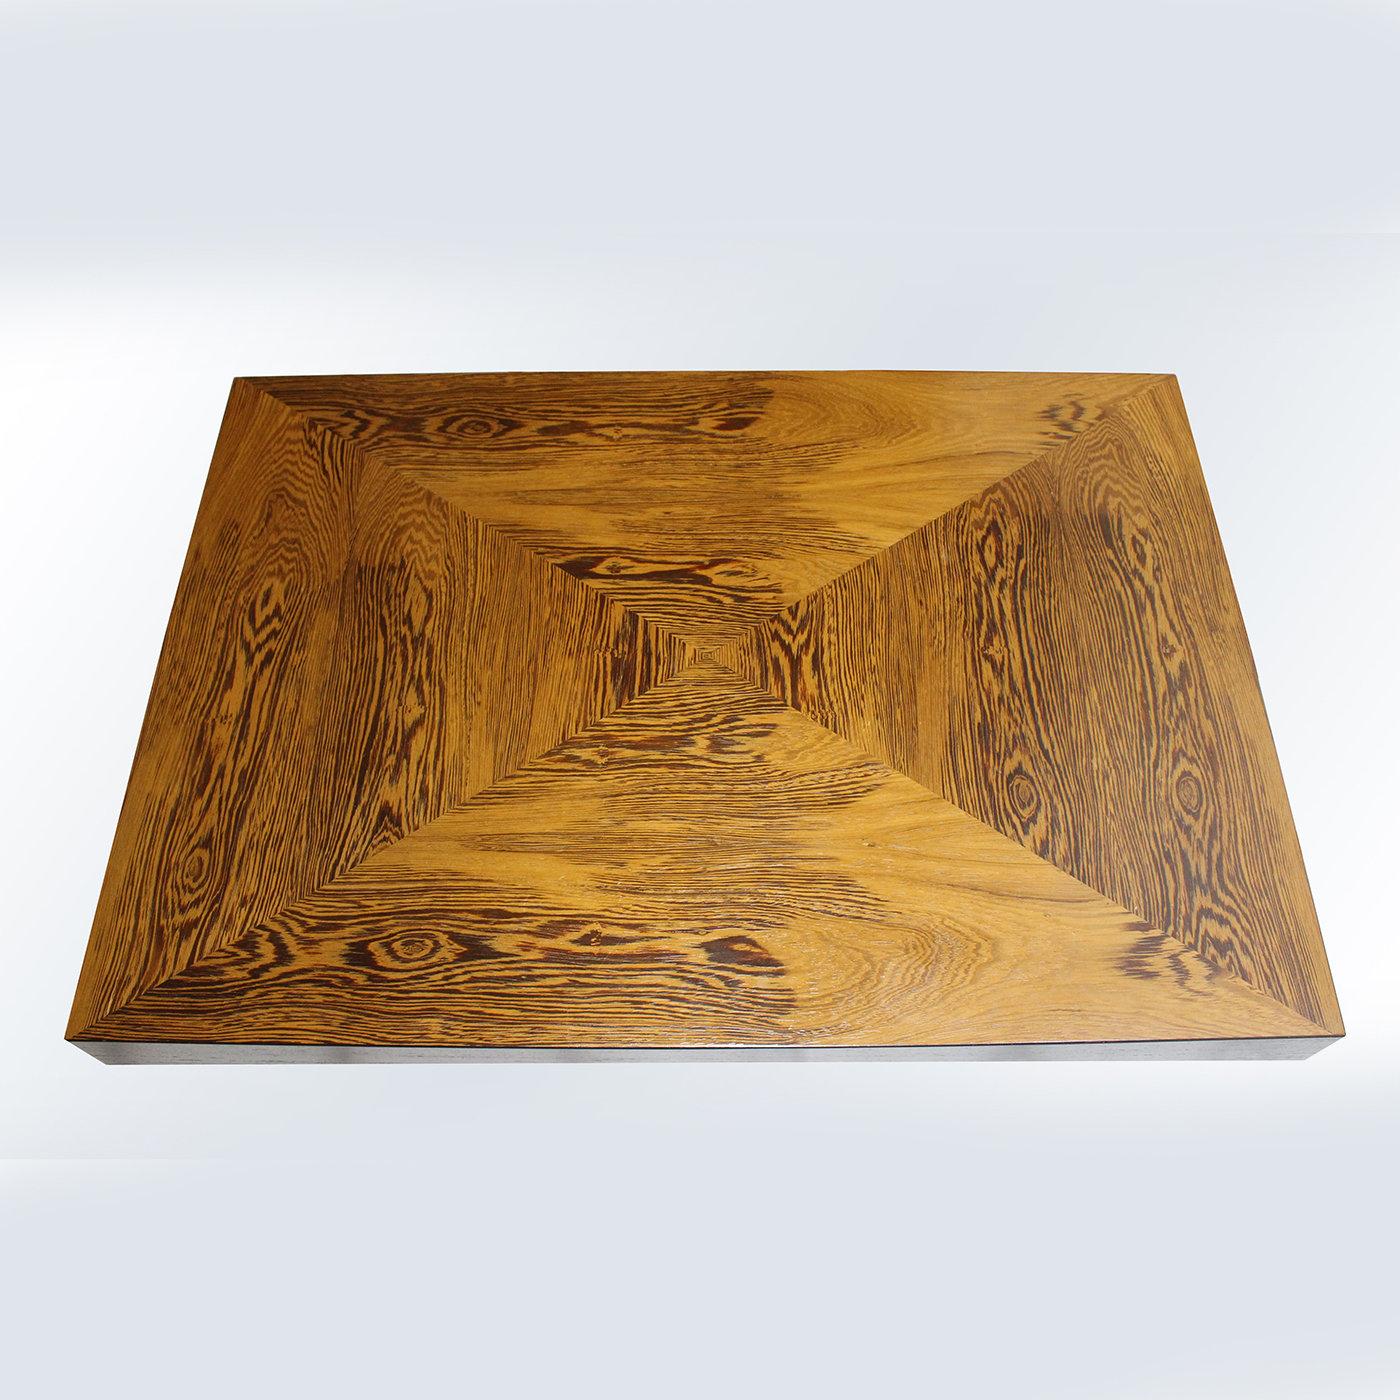 This superb numbered piece from a limited edition of 20 numbered pieces is sure to distill its organic flair and distinct modern style into any modern home. Crafted of solid wenge, showcased in its unrepeatable veins making each piece entirely